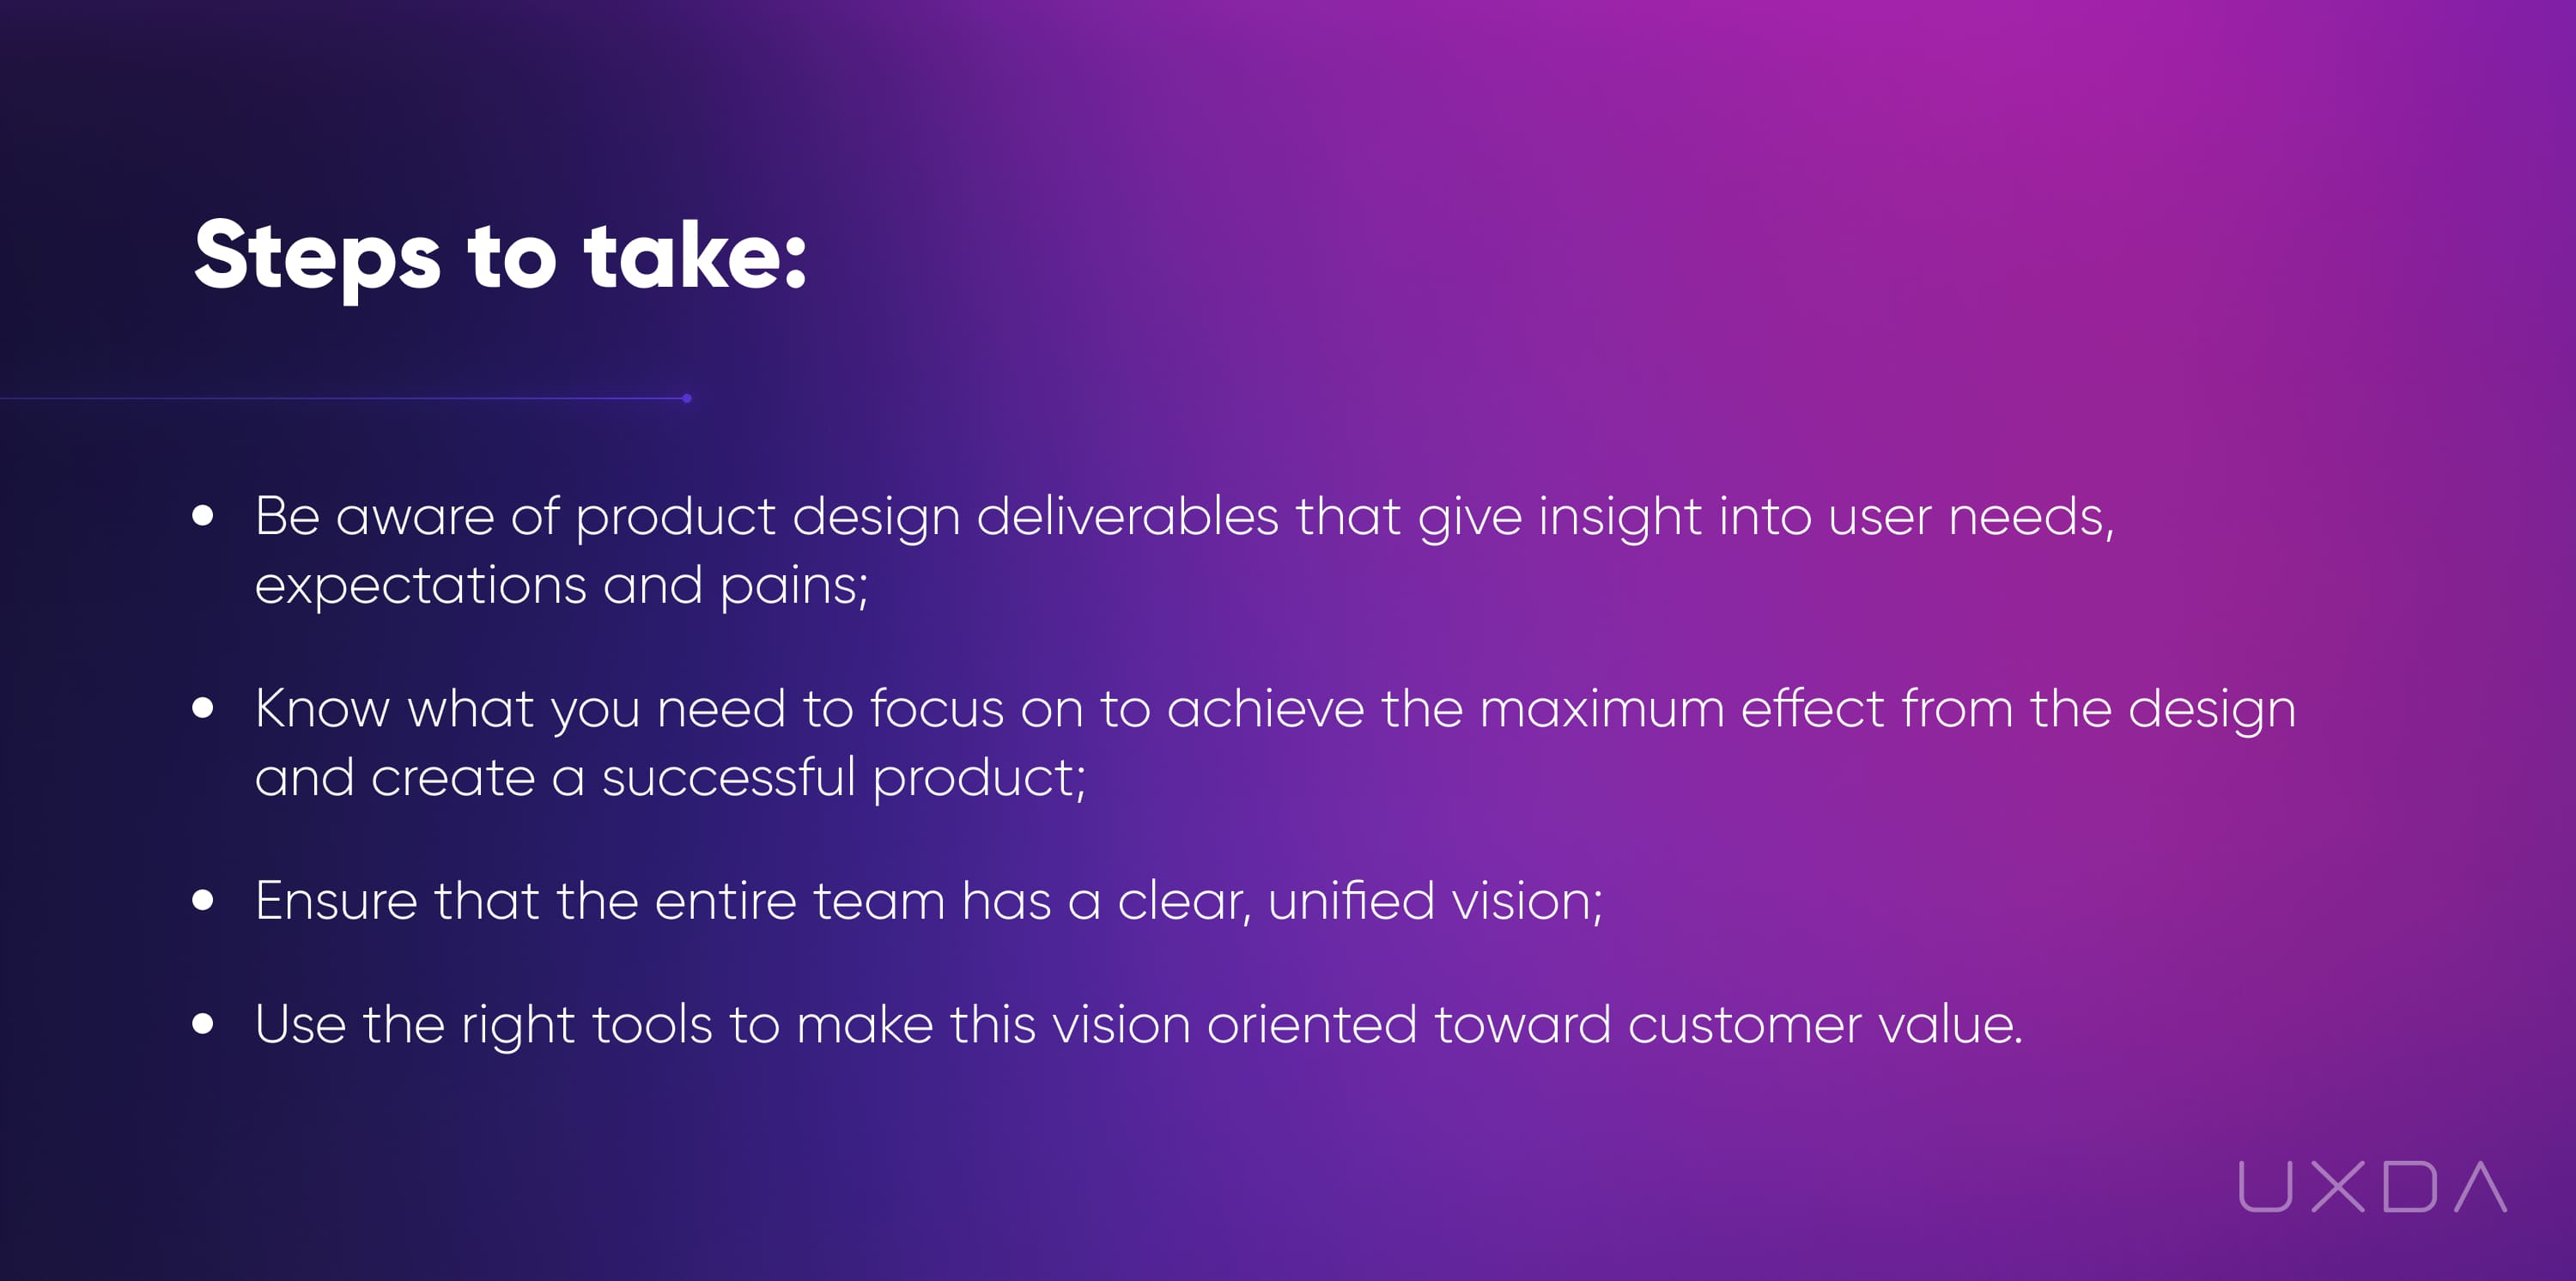 Financial UX Methodology Design Pyramid Product steps to take unified vision